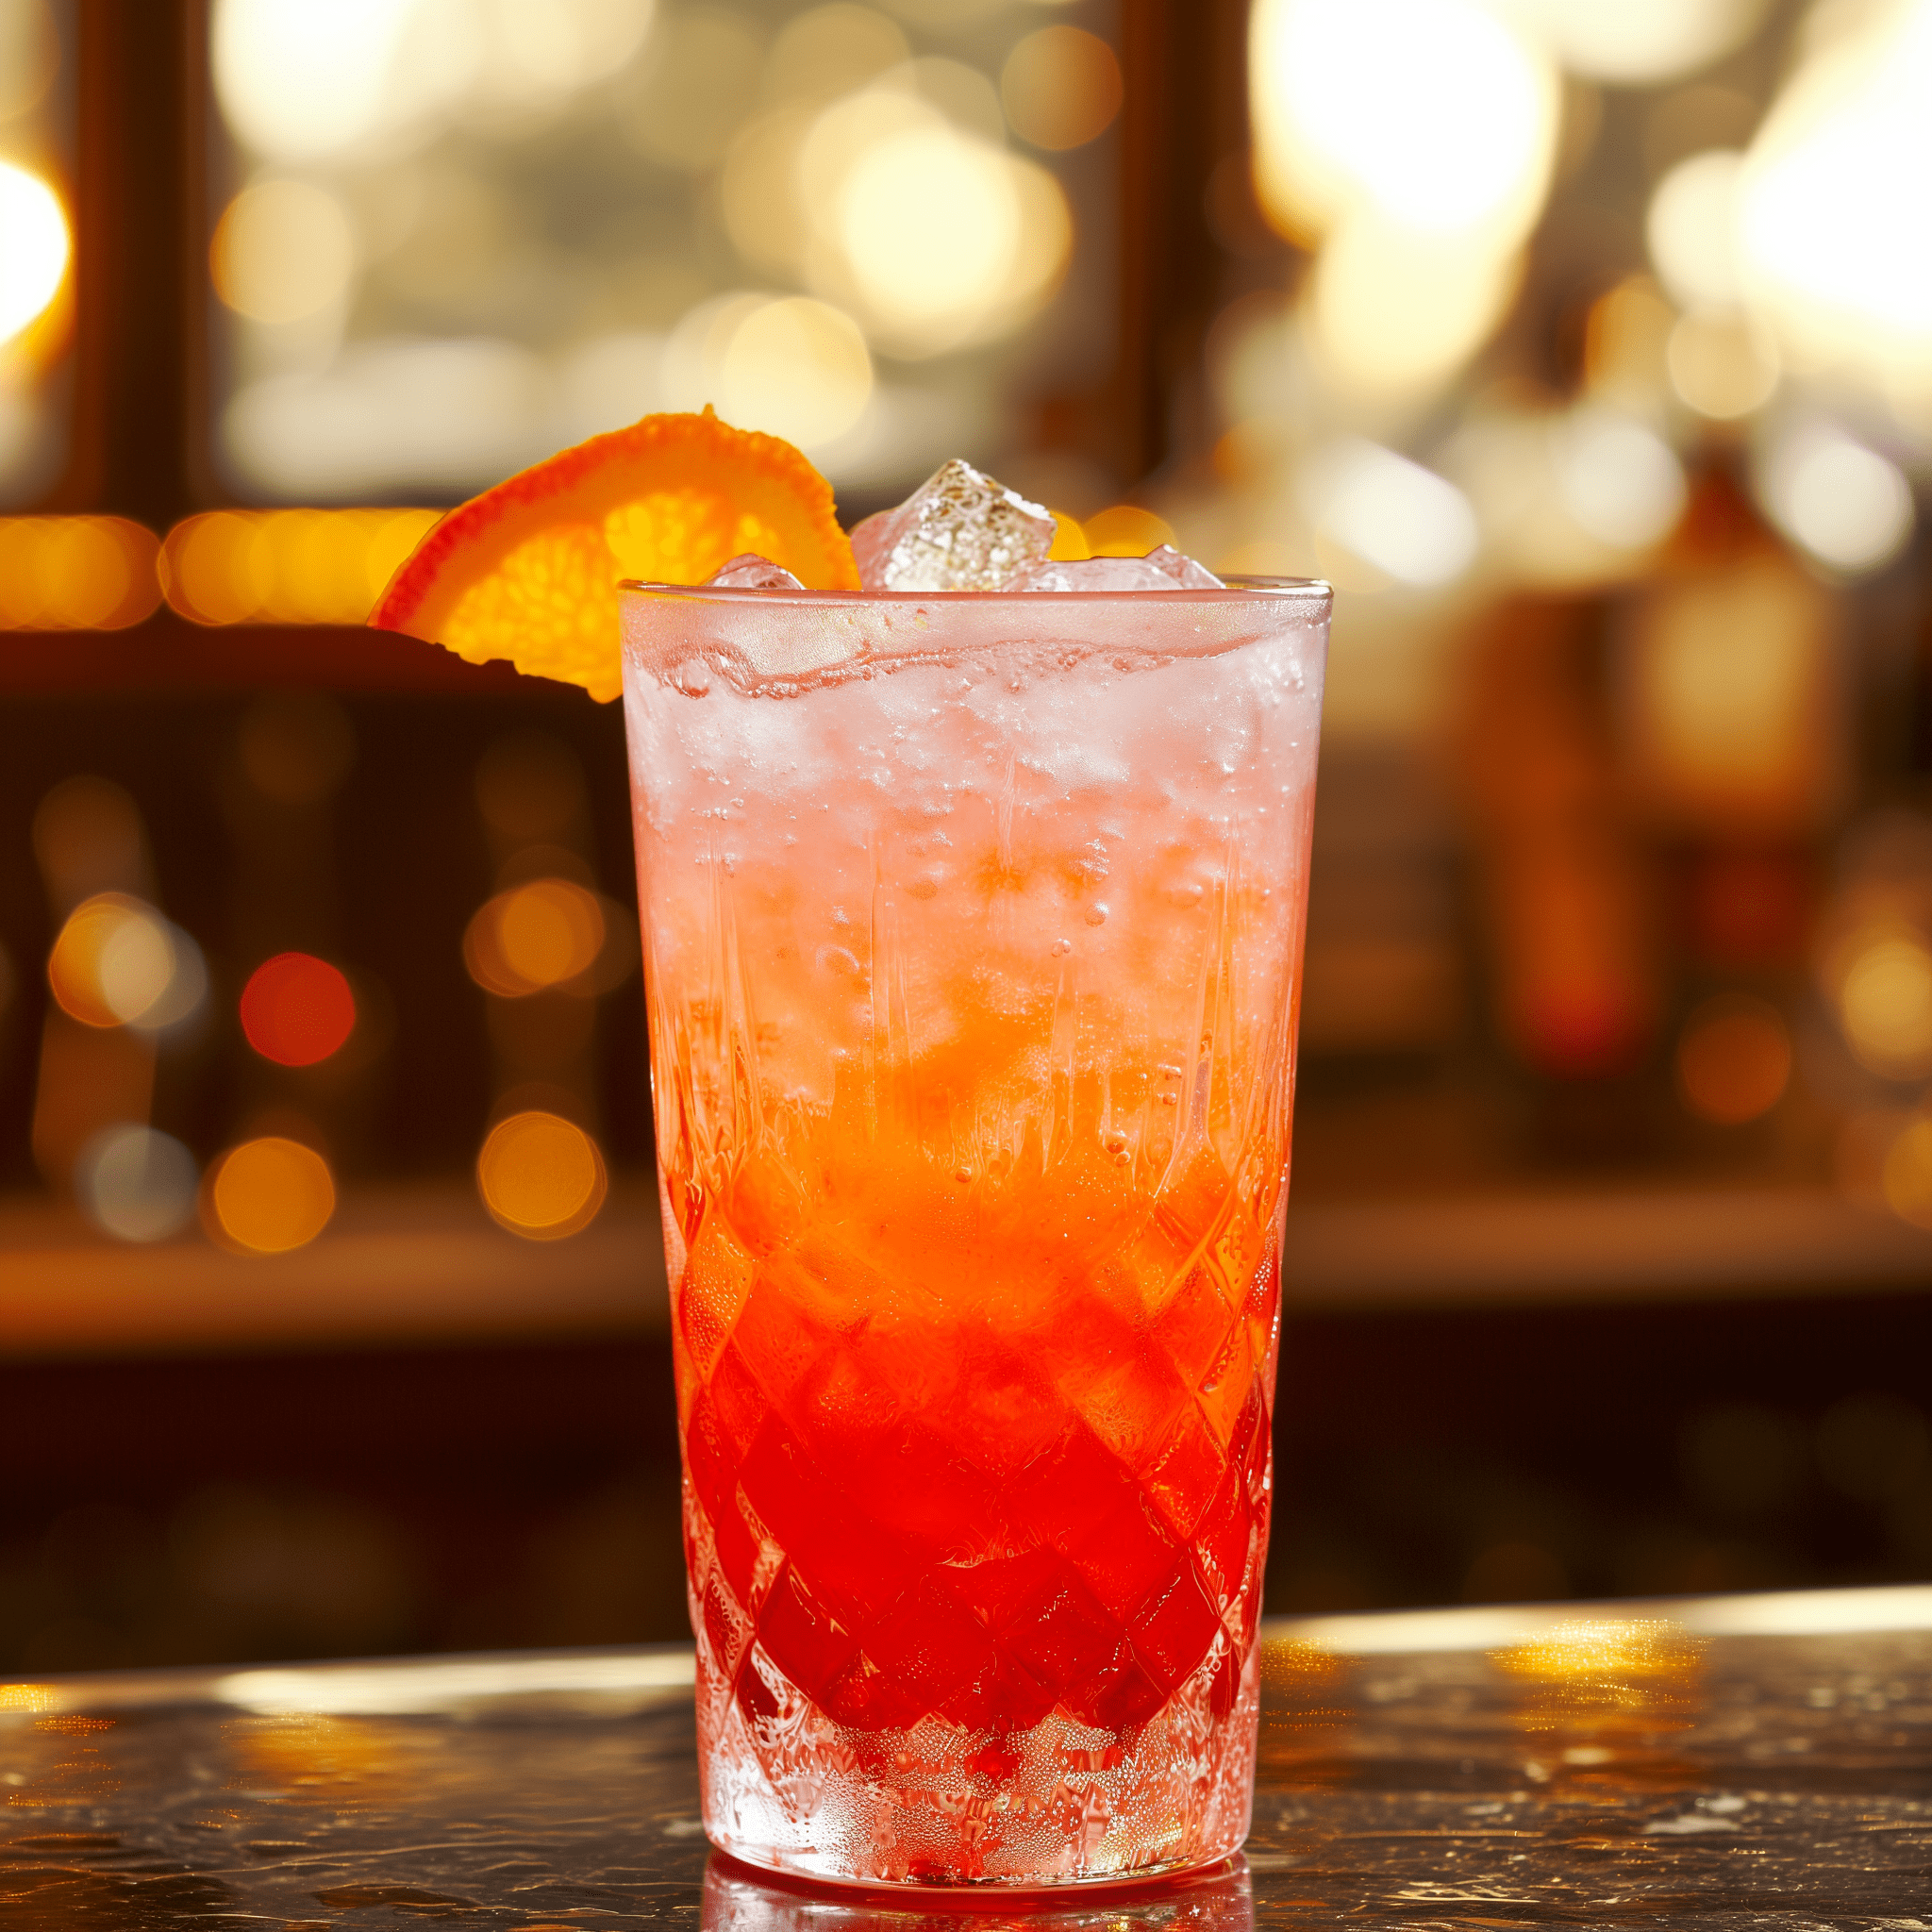 Garibaldi Cocktail Recipe - The Garibaldi cocktail offers a bittersweet taste with a tangy citrus kick. The Campari provides a herbal bitterness that is perfectly balanced by the fresh, sweet and slightly tart flavor of the orange juice.